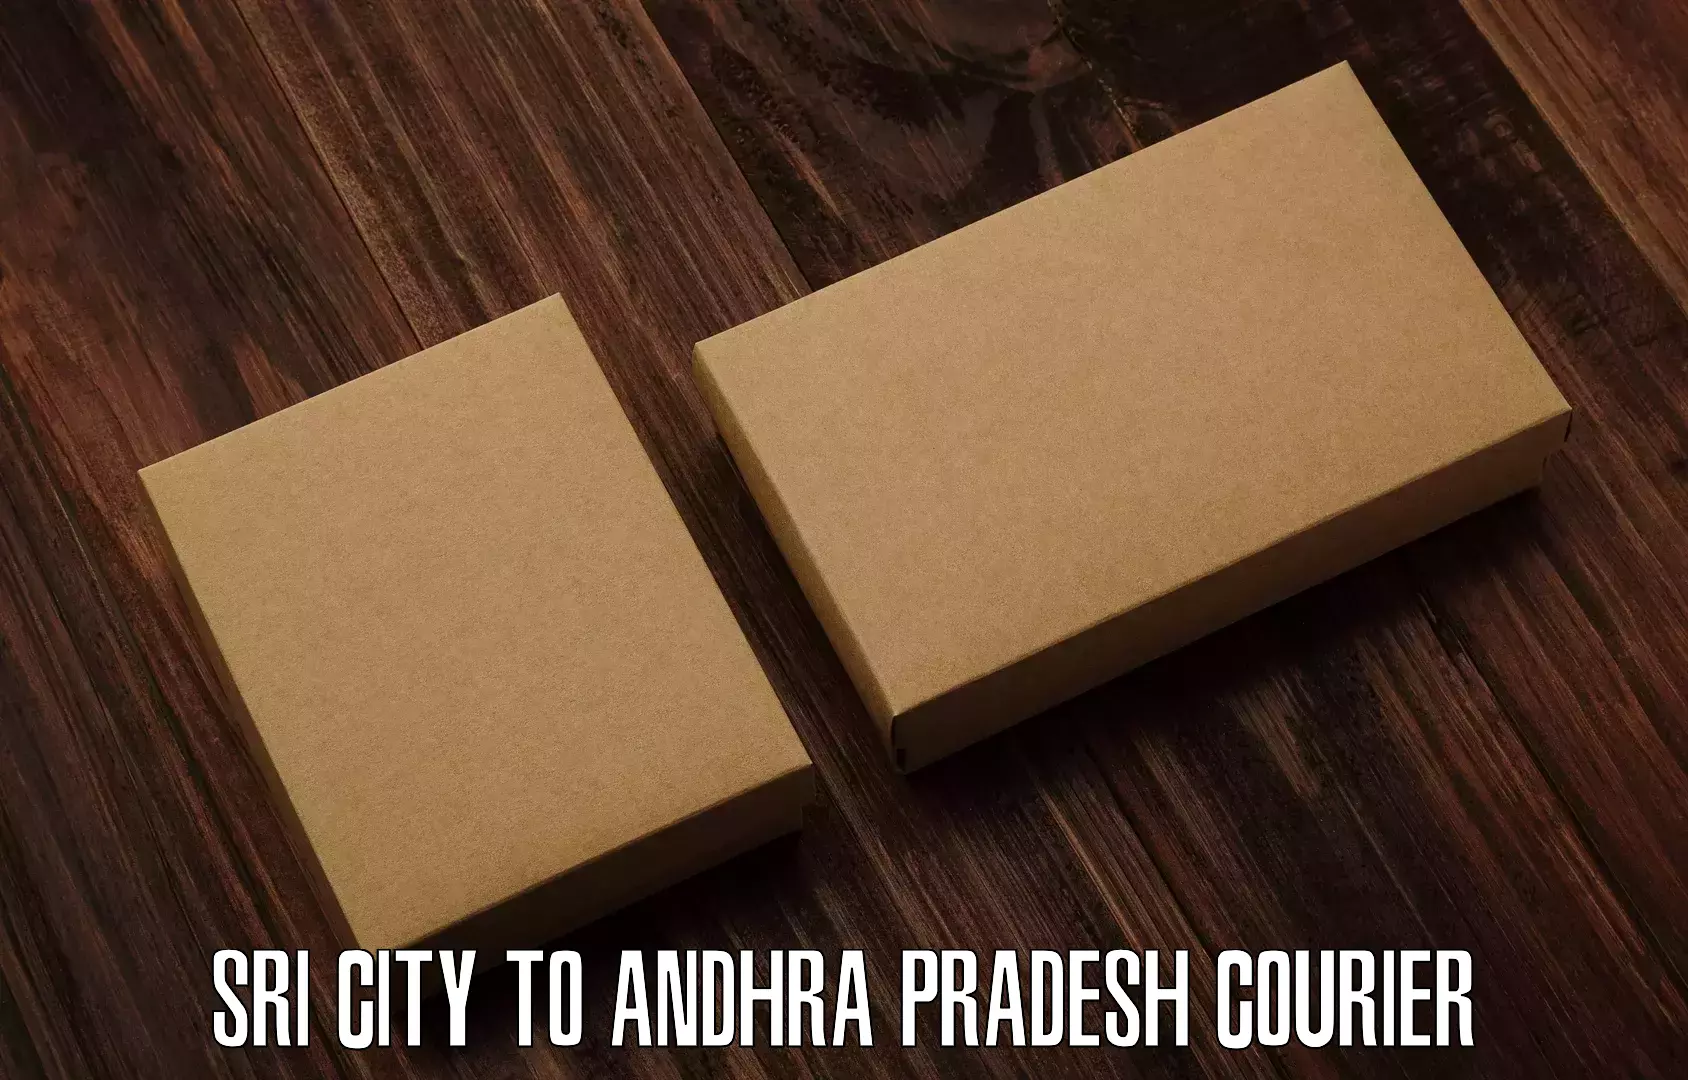 Weekend courier service Sri City to Chitrada